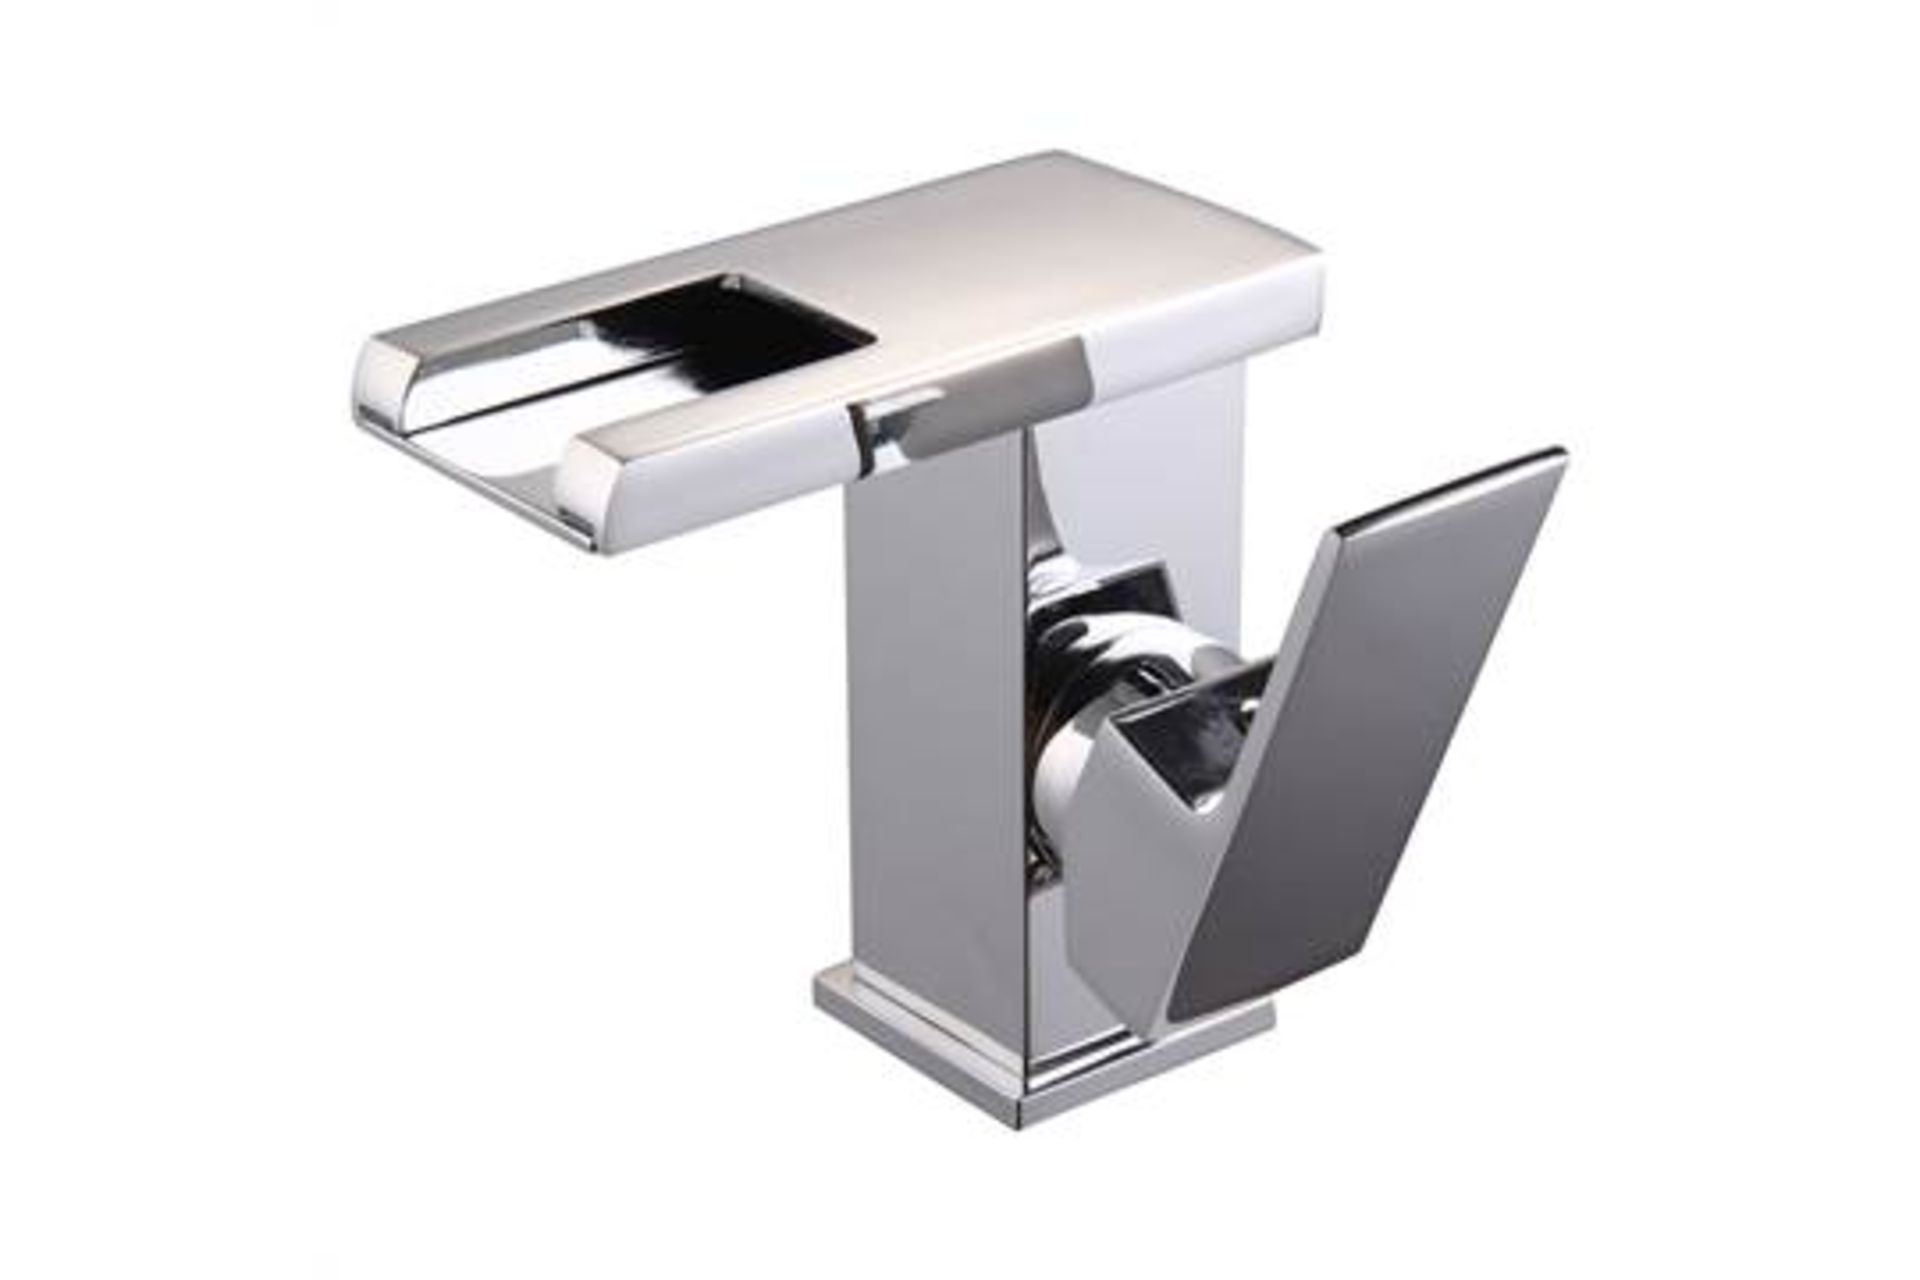 LED Waterfall Bathroom Basin Mixer Tap. RRP £229.99. Easy to install and clean. All copper - Image 3 of 3